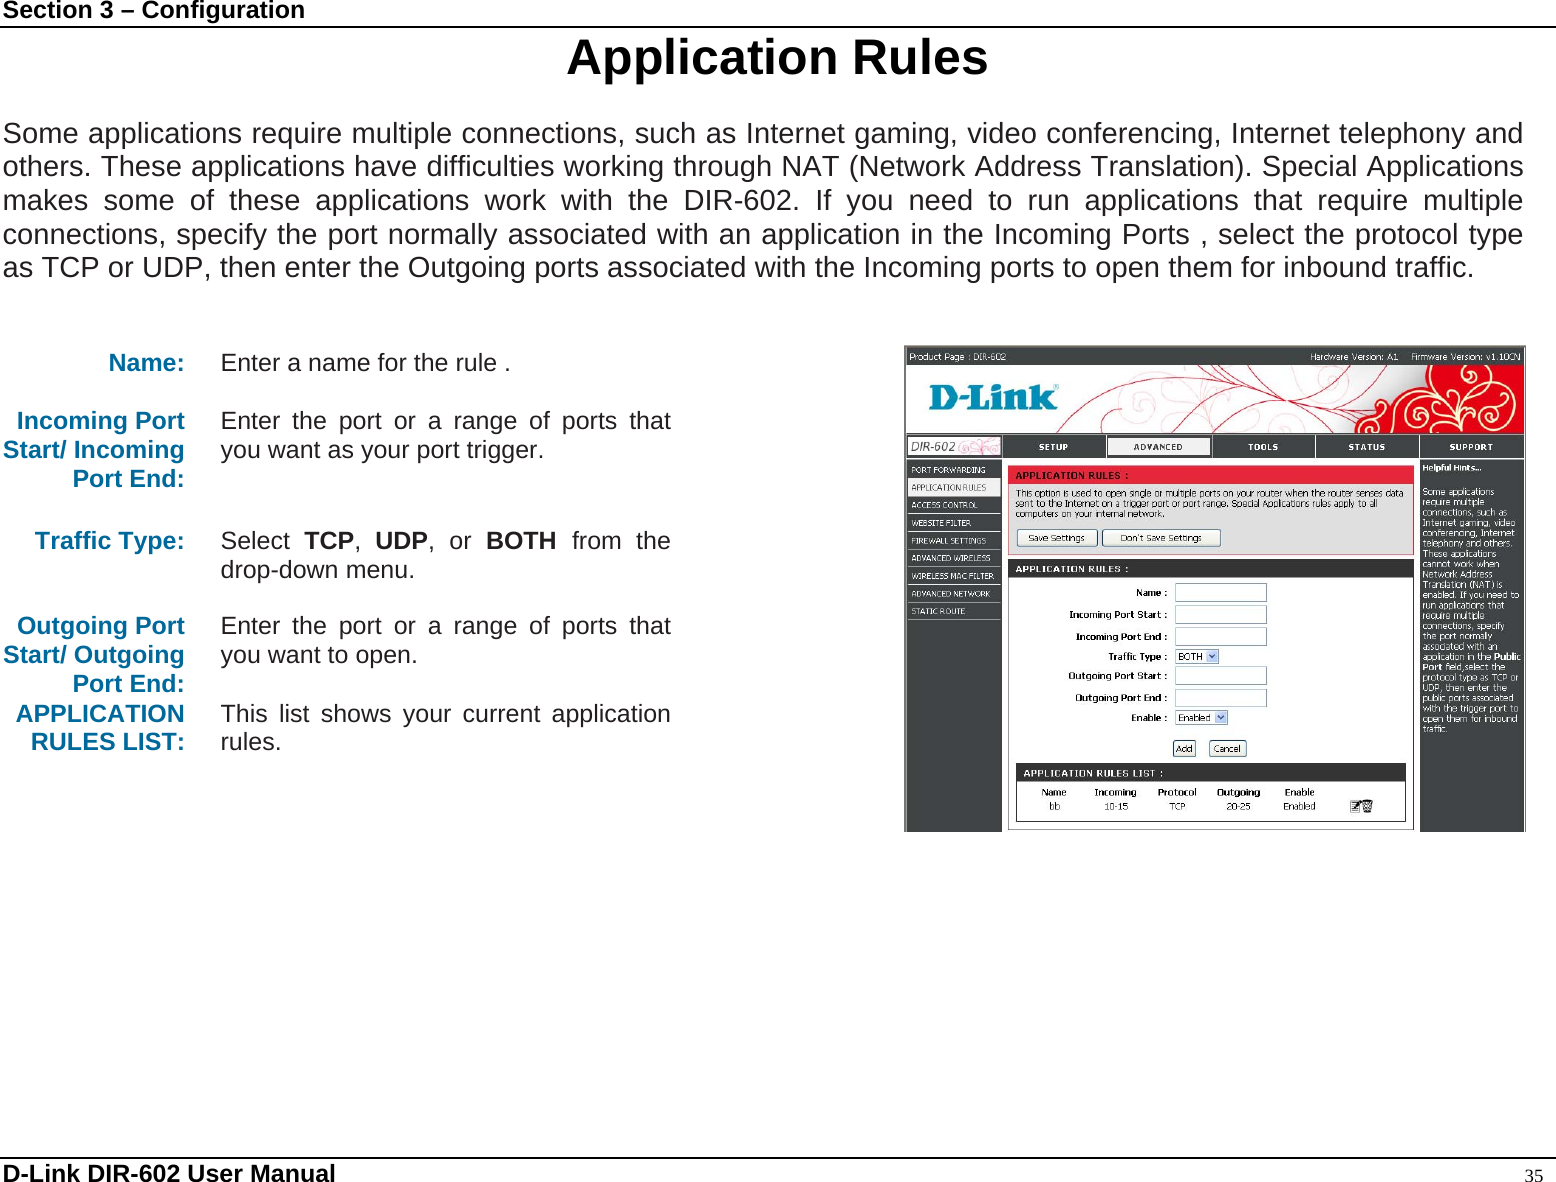 Section 3 – Configuration  Application Rules  Some applications require multiple connections, such as Internet gaming, video conferencing, Internet telephony and others. These applications have difficulties working through NAT (Network Address Translation). Special Applications makes some of these applications work with the DIR-602. If you need to run applications that require multiple connections, specify the port normally associated with an application in the Incoming Ports , select the protocol type as TCP or UDP, then enter the Outgoing ports associated with the Incoming ports to open them for inbound traffic.   Name: Enter a name for the rule .  Incoming Port   Start/ Incoming Port End: Enter the port or a range of ports that you want as your port trigger.   Traffic Type:  Select  TCP,  UDP, or BOTH  from the drop-down menu.  Outgoing Port Start/ Outgoing Port End: Enter the port or a range of ports that you want to open.  APPLICATION RULES LIST:    This list shows your current application rules.    D-Link DIR-602 User Manual                                                                                               35 